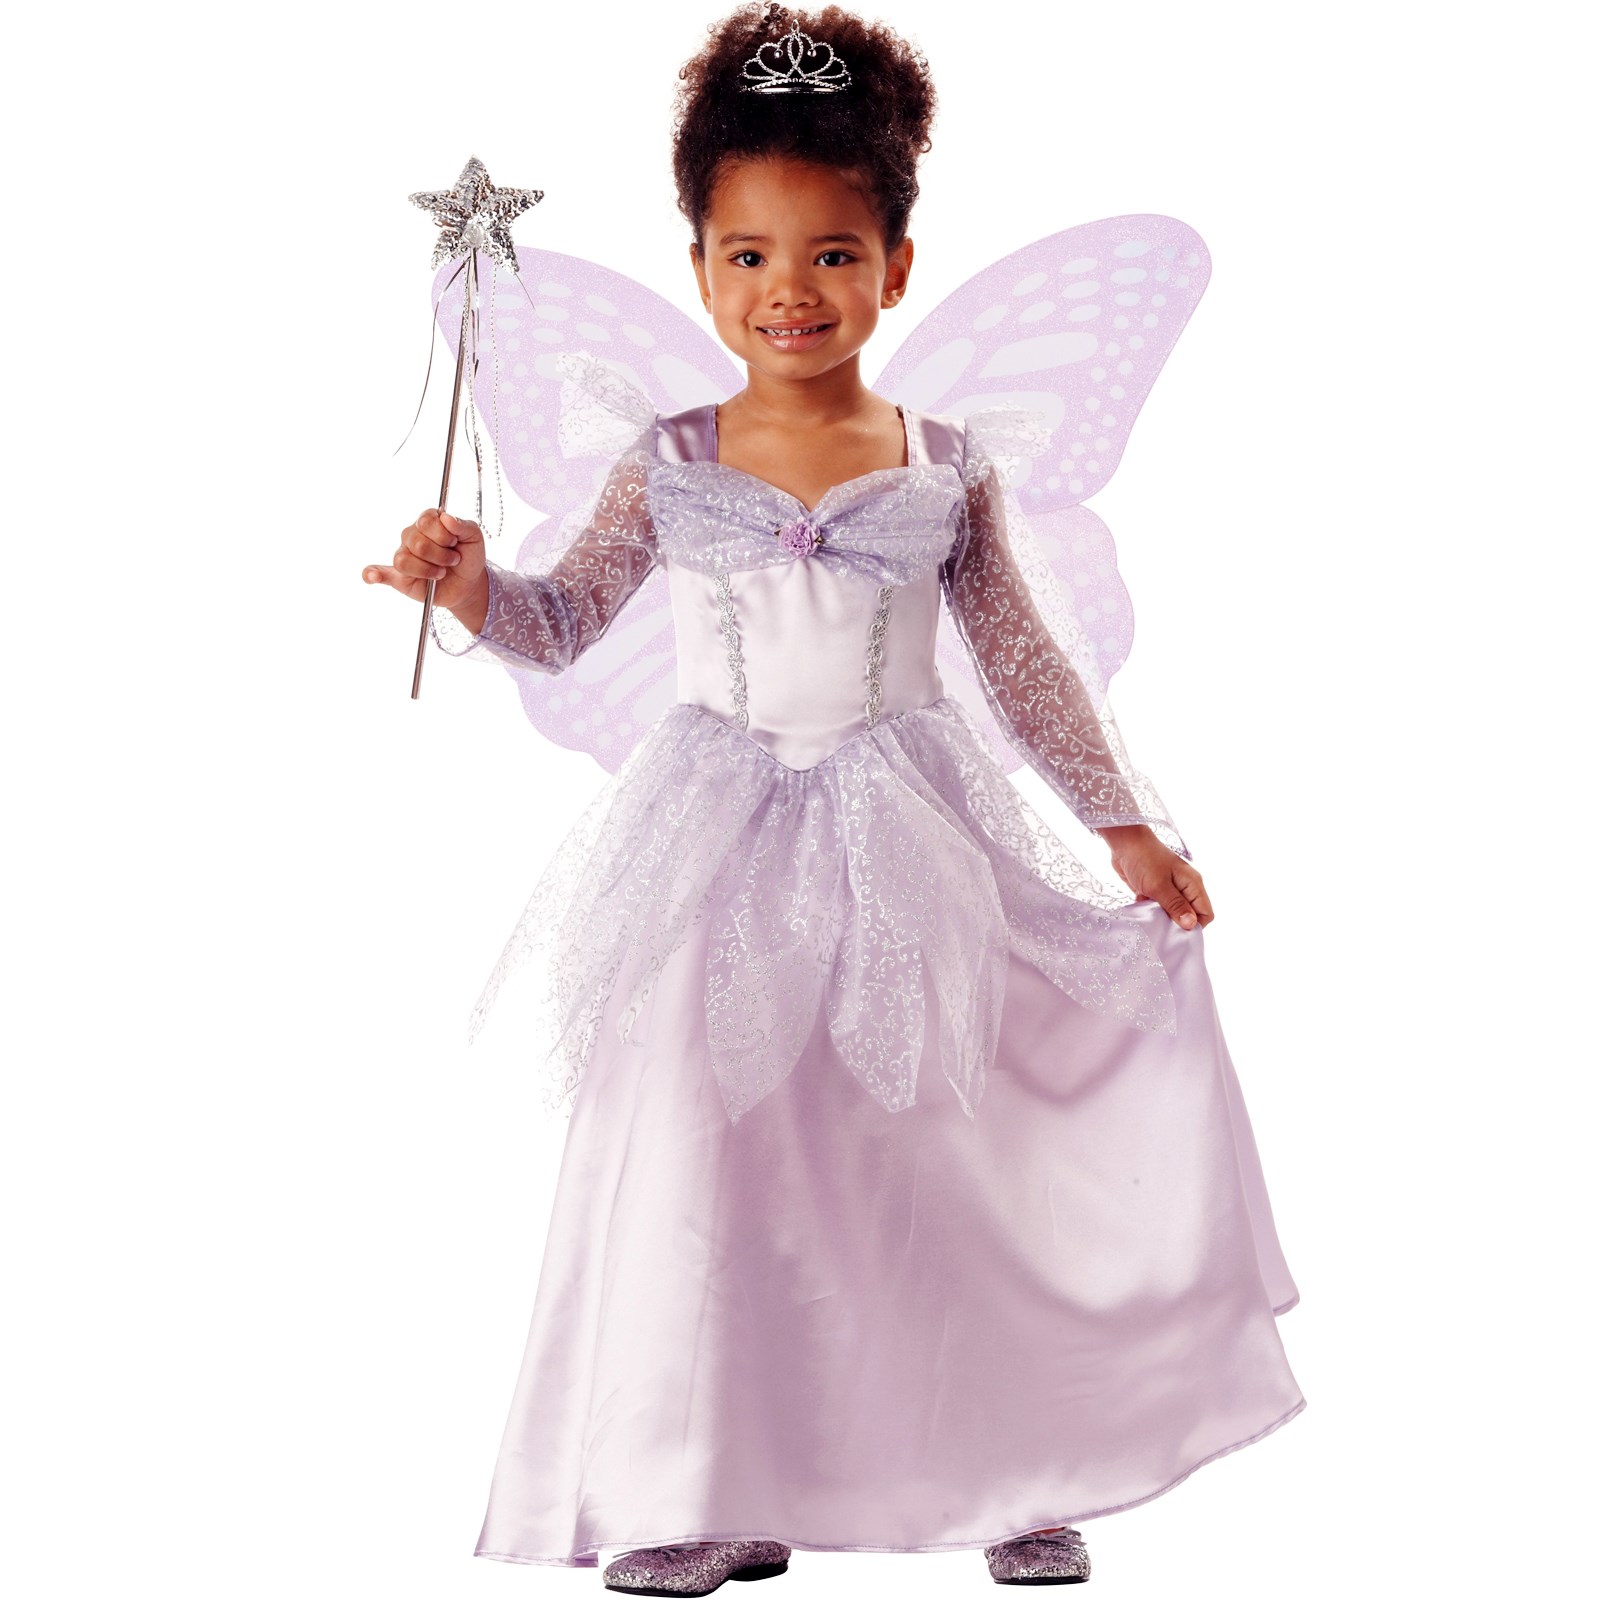 Butterfly Princess Toddler / Child Costume